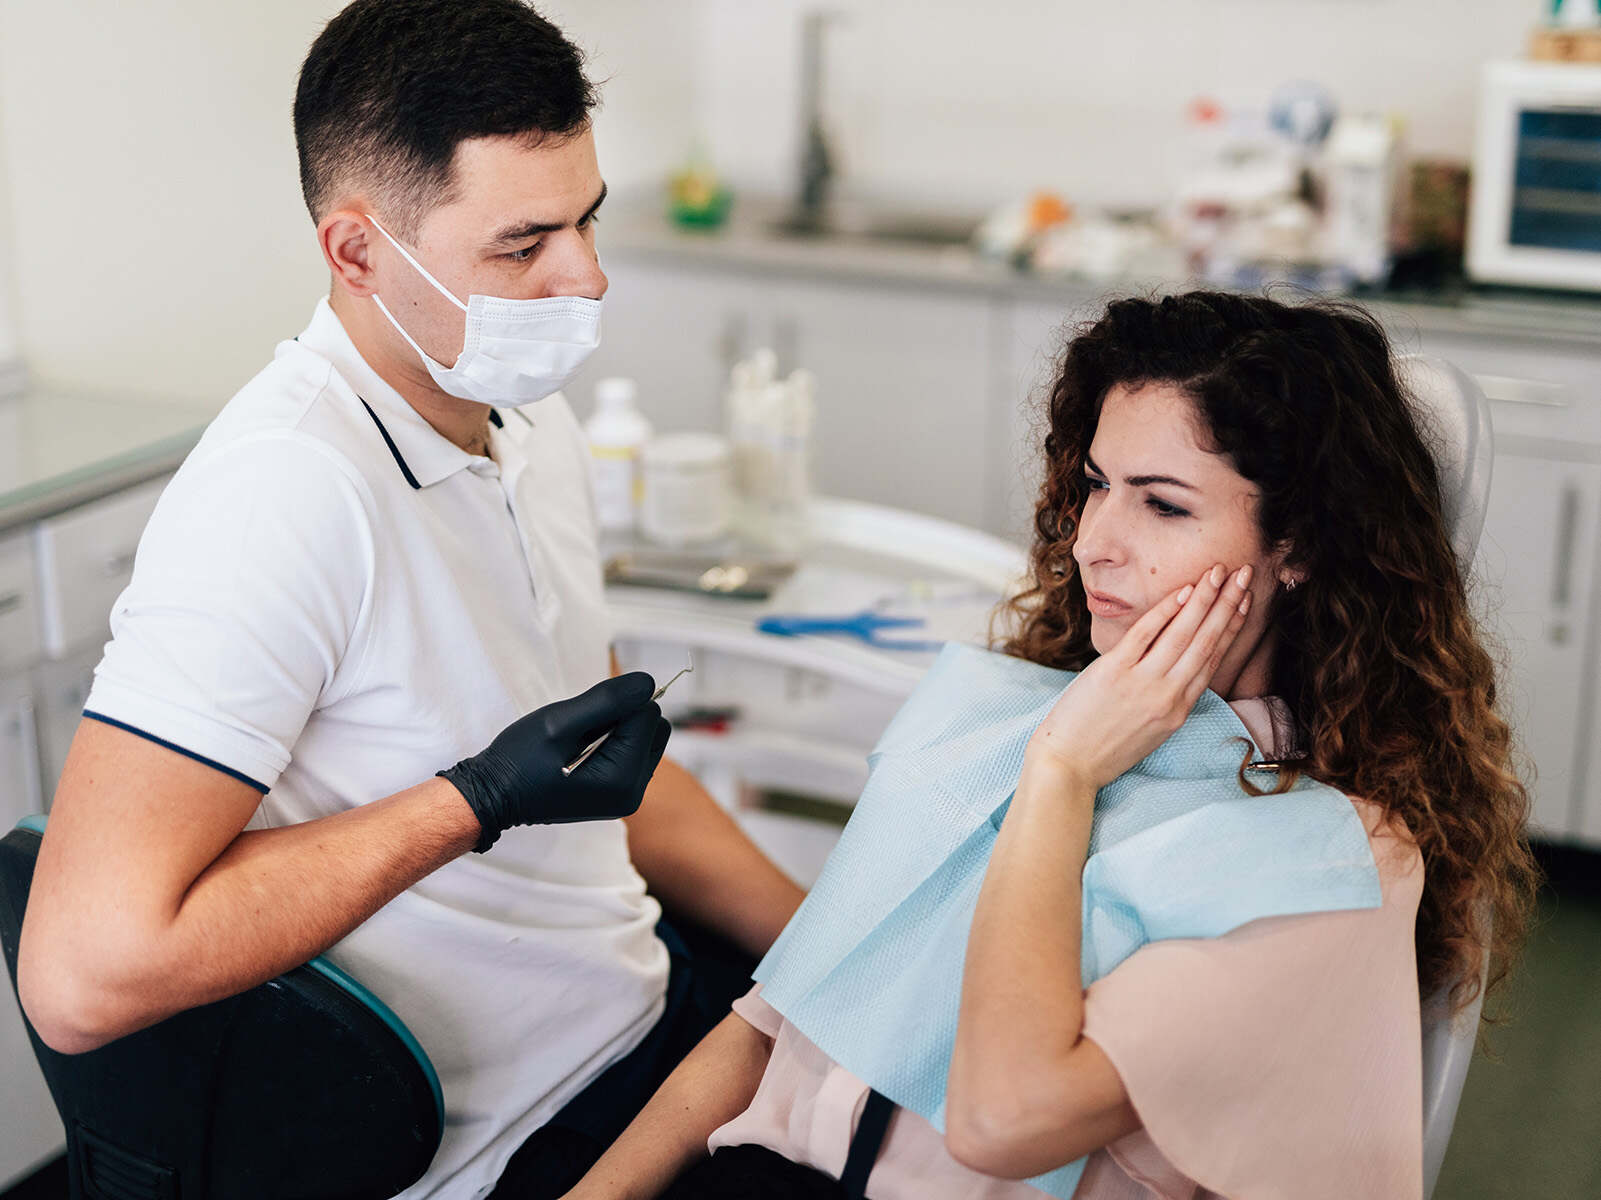 What Are The Warning Signs Of A Root Canal Infection?